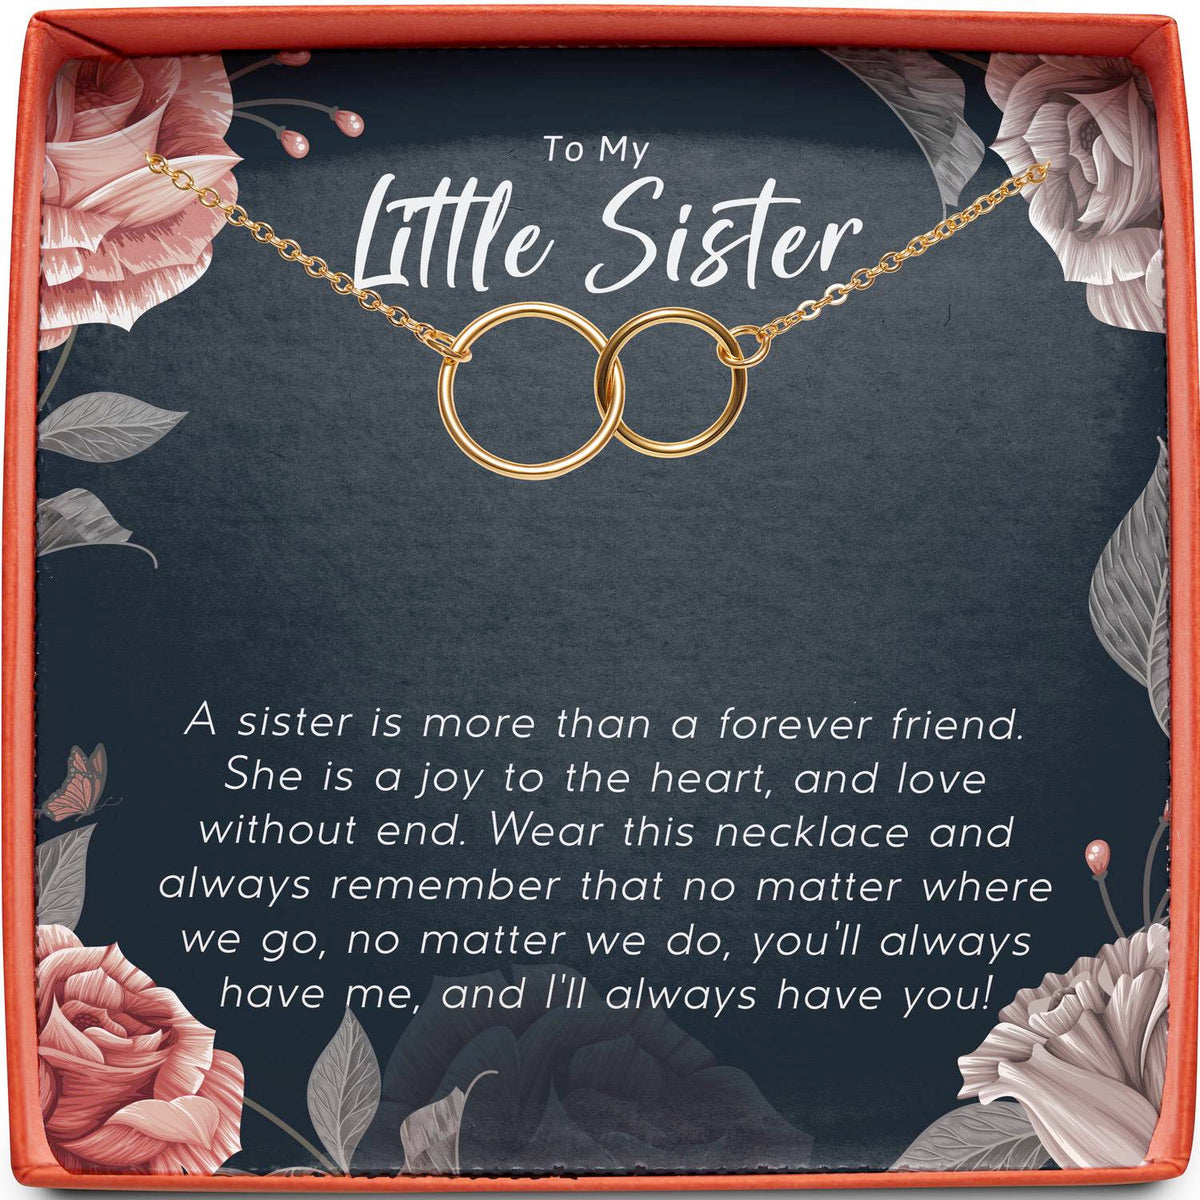 To My Little Sister | More Than a Forever Friend | Interlocking Circles